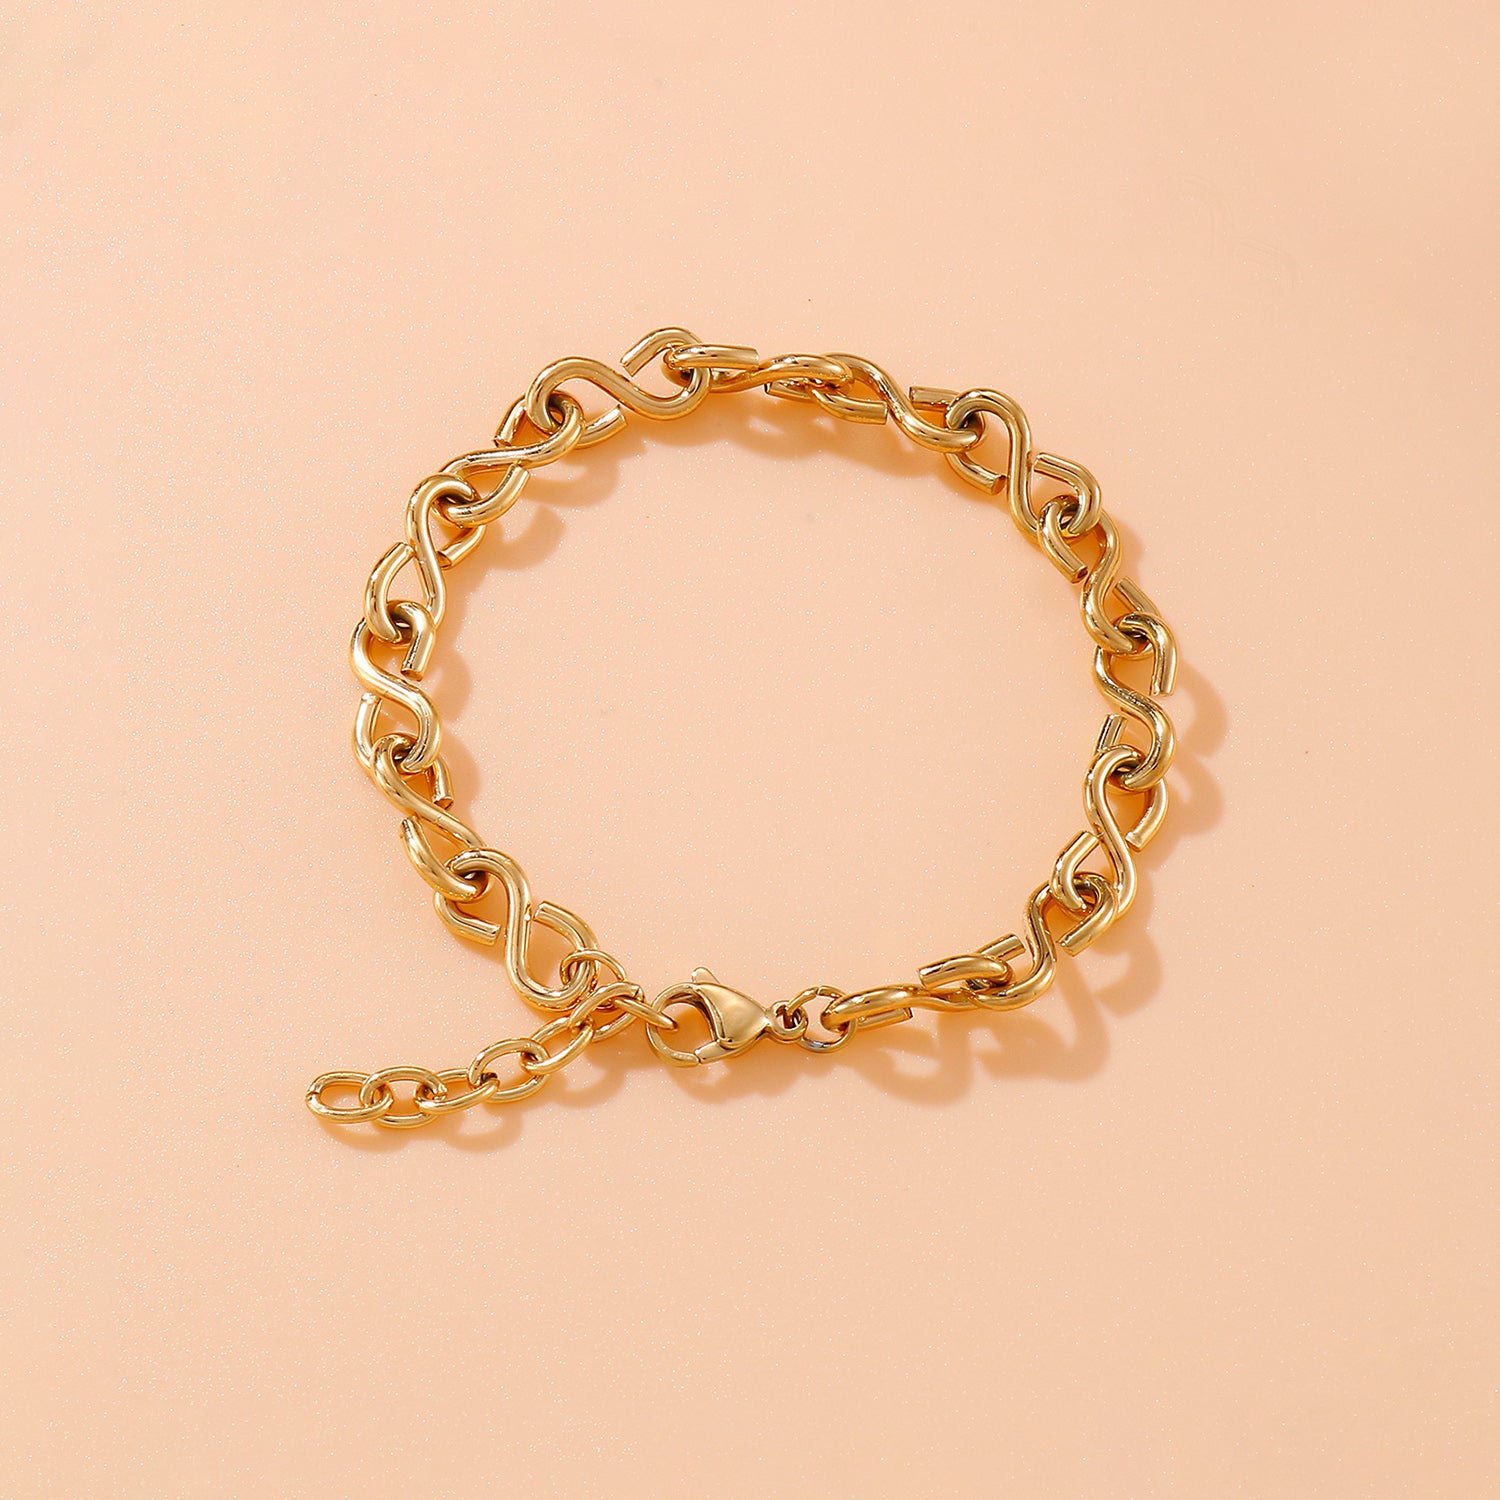 Stainless Steel Figure 8 Chain Link Bracelet Gold One Size